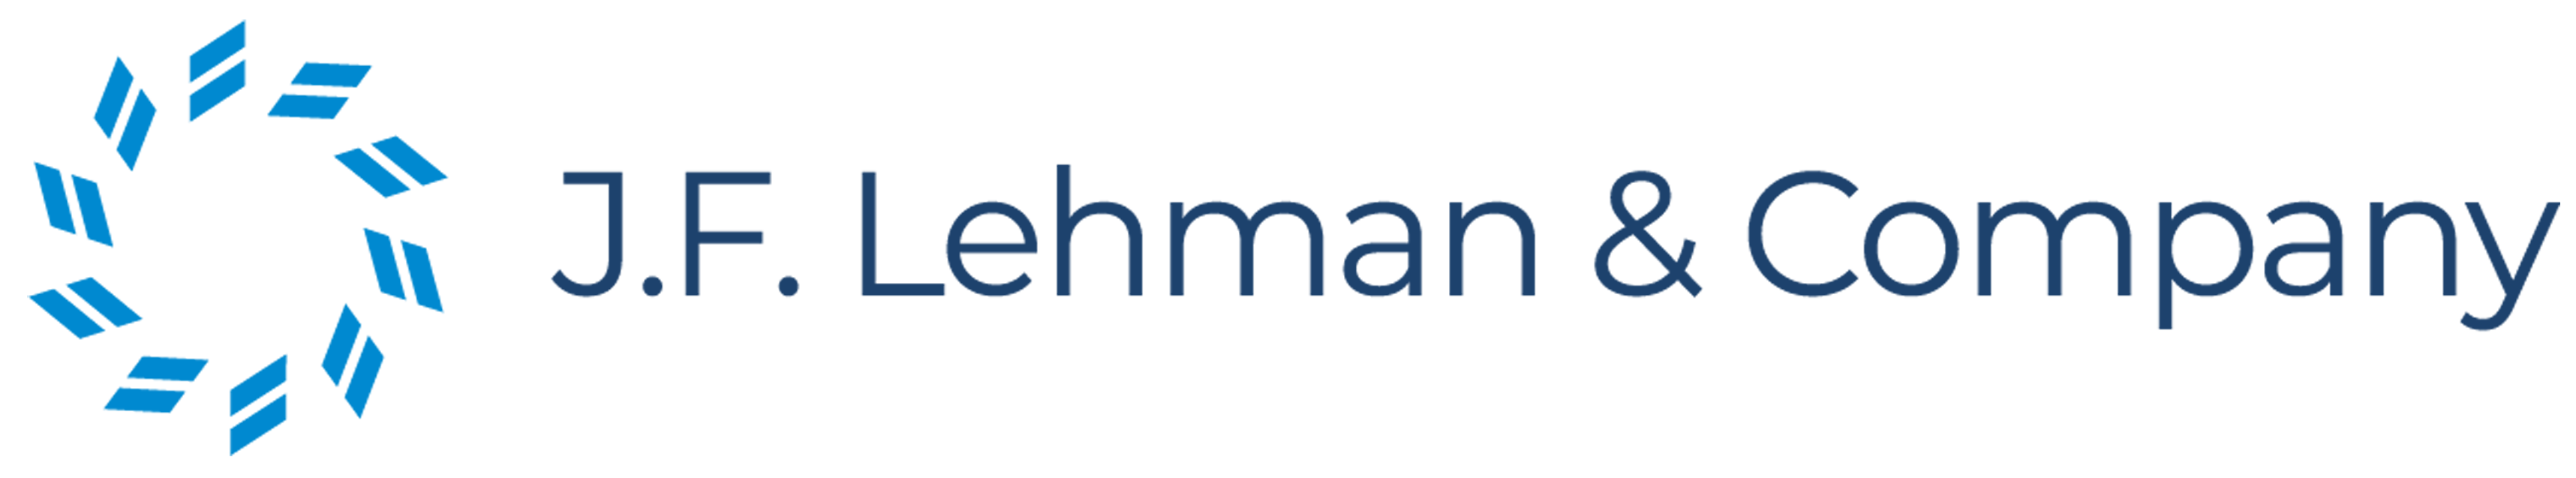 J.F. Lehman & Company Welcomes New Team Members and Announces Promotions, March 9 2020